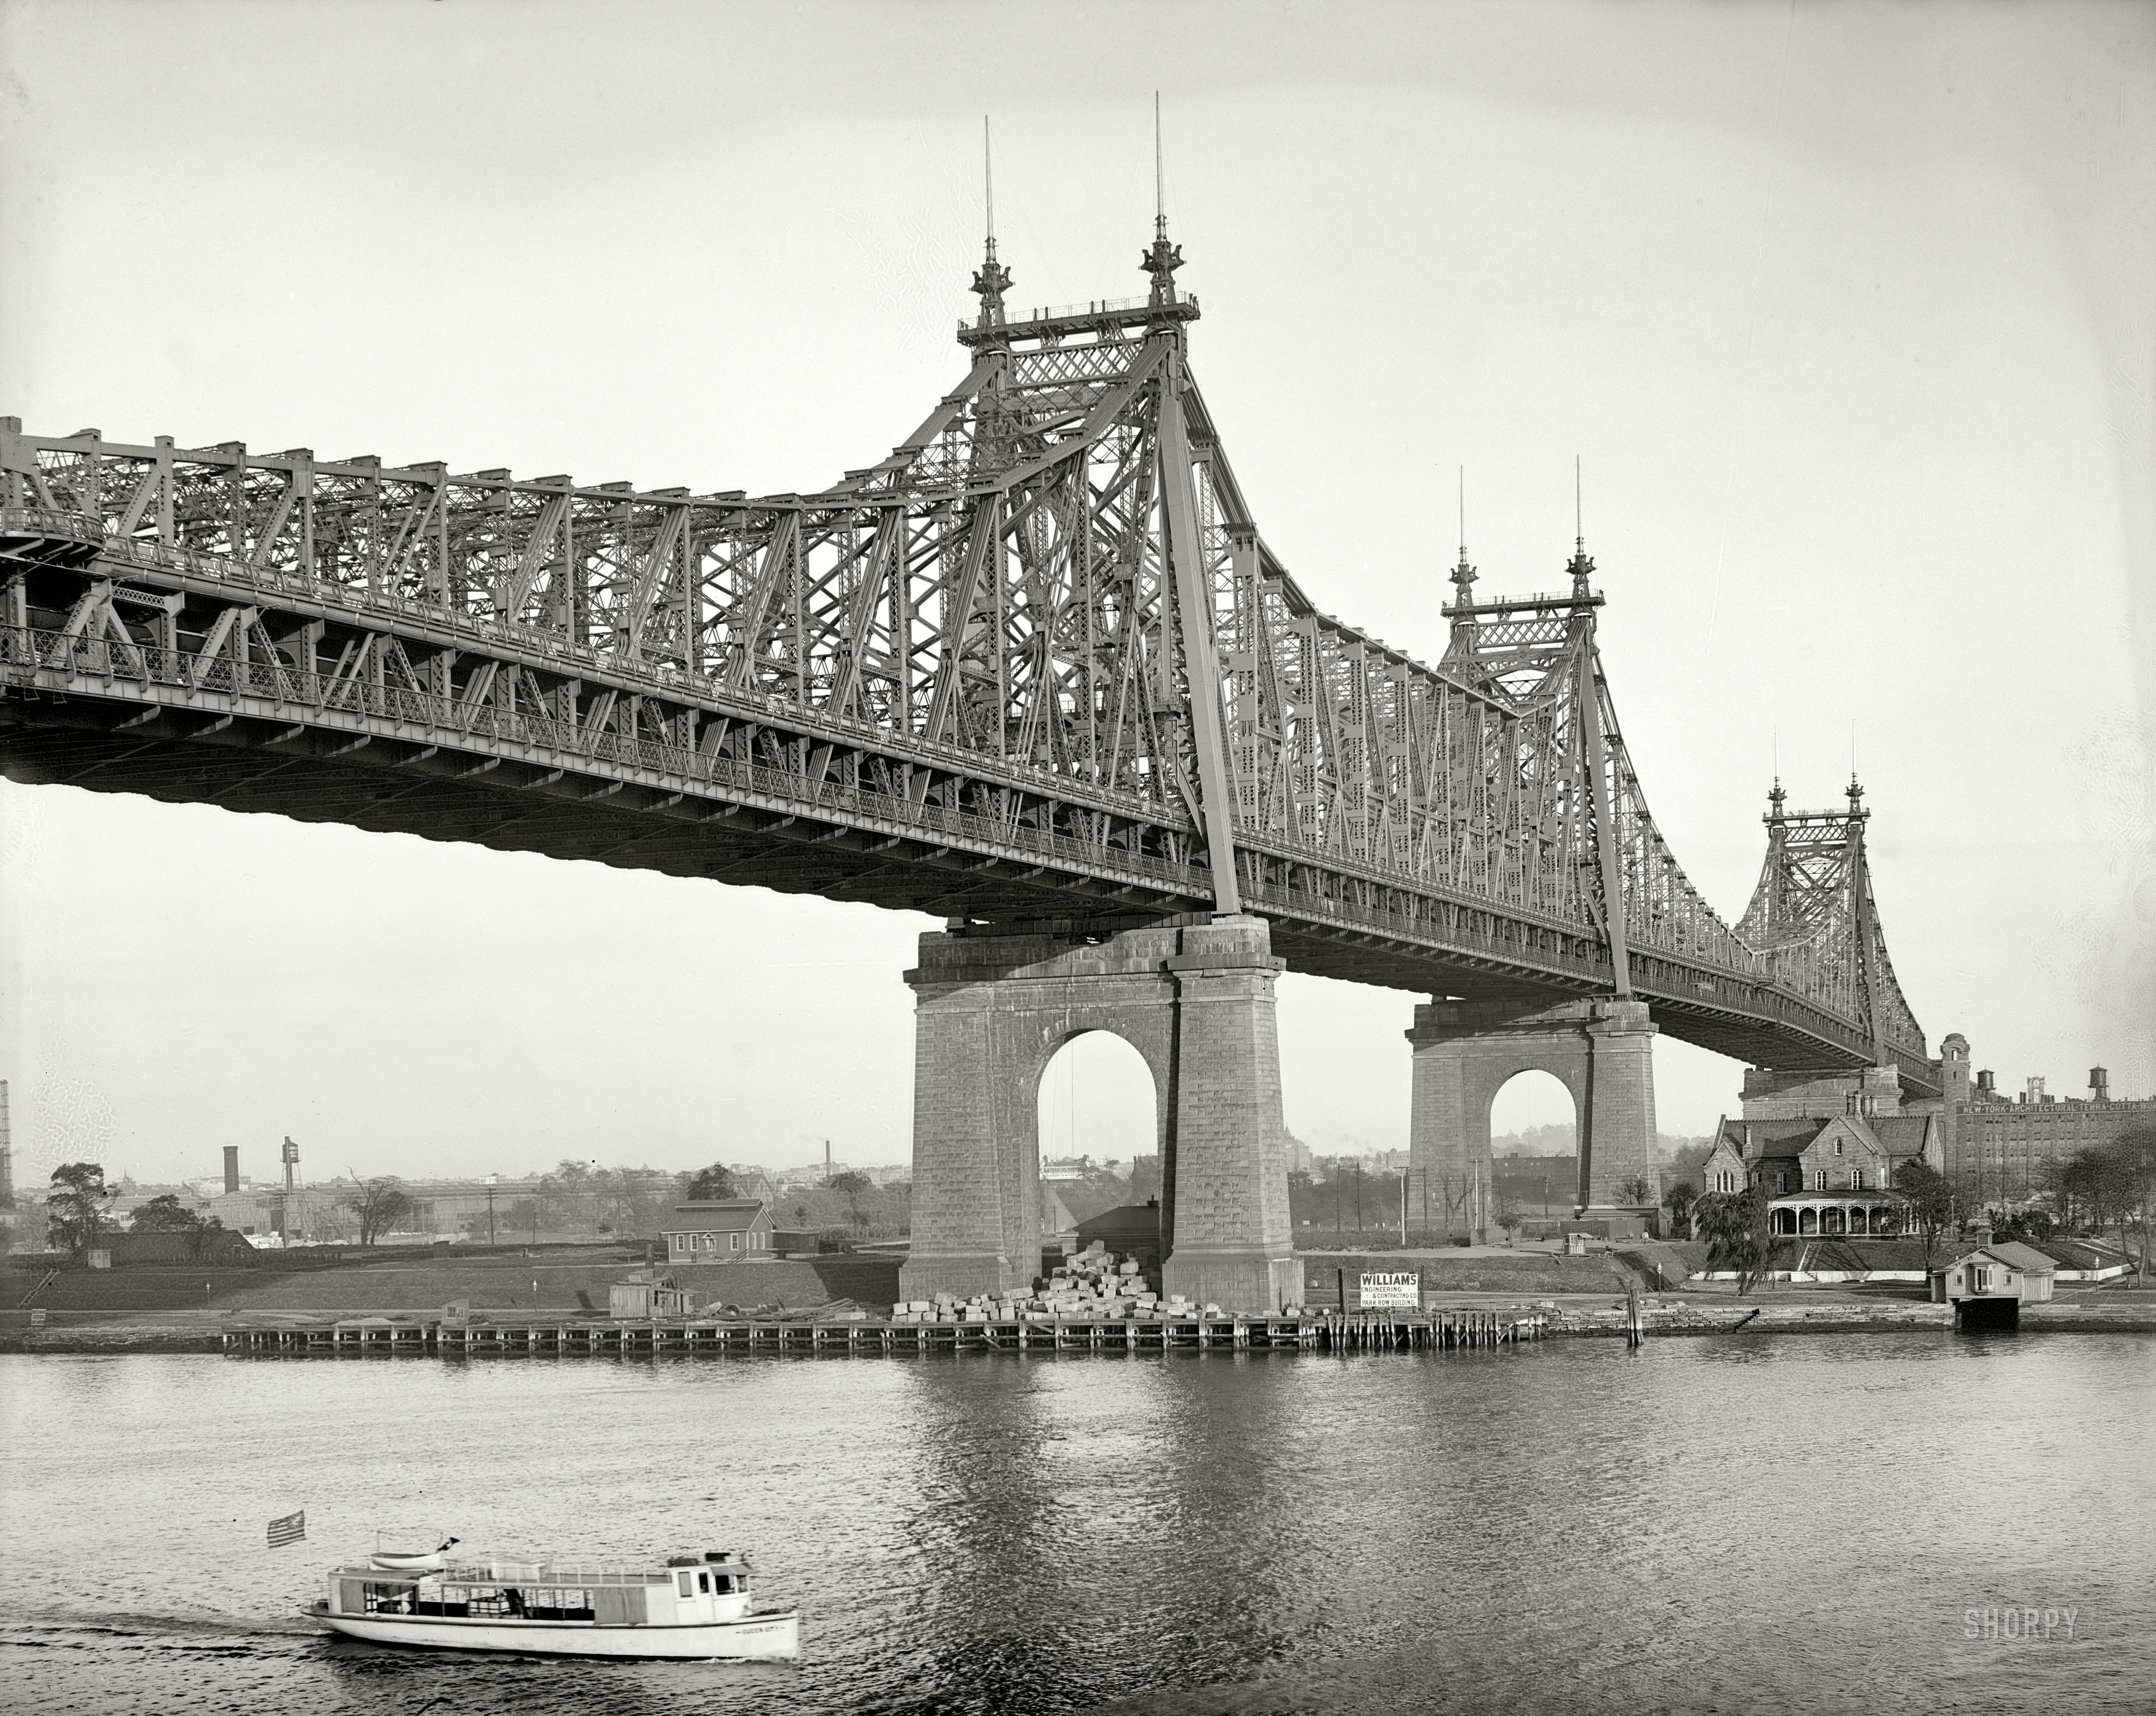 New York circa 1909. "East River and Blackwell's Island Bridge," a.k.a. the Queensboro Bridge or the 59th Street Bridge, around the time of its completion. 8x10 inch dry plate glass negative, Detroit Publishing Company. View full size.